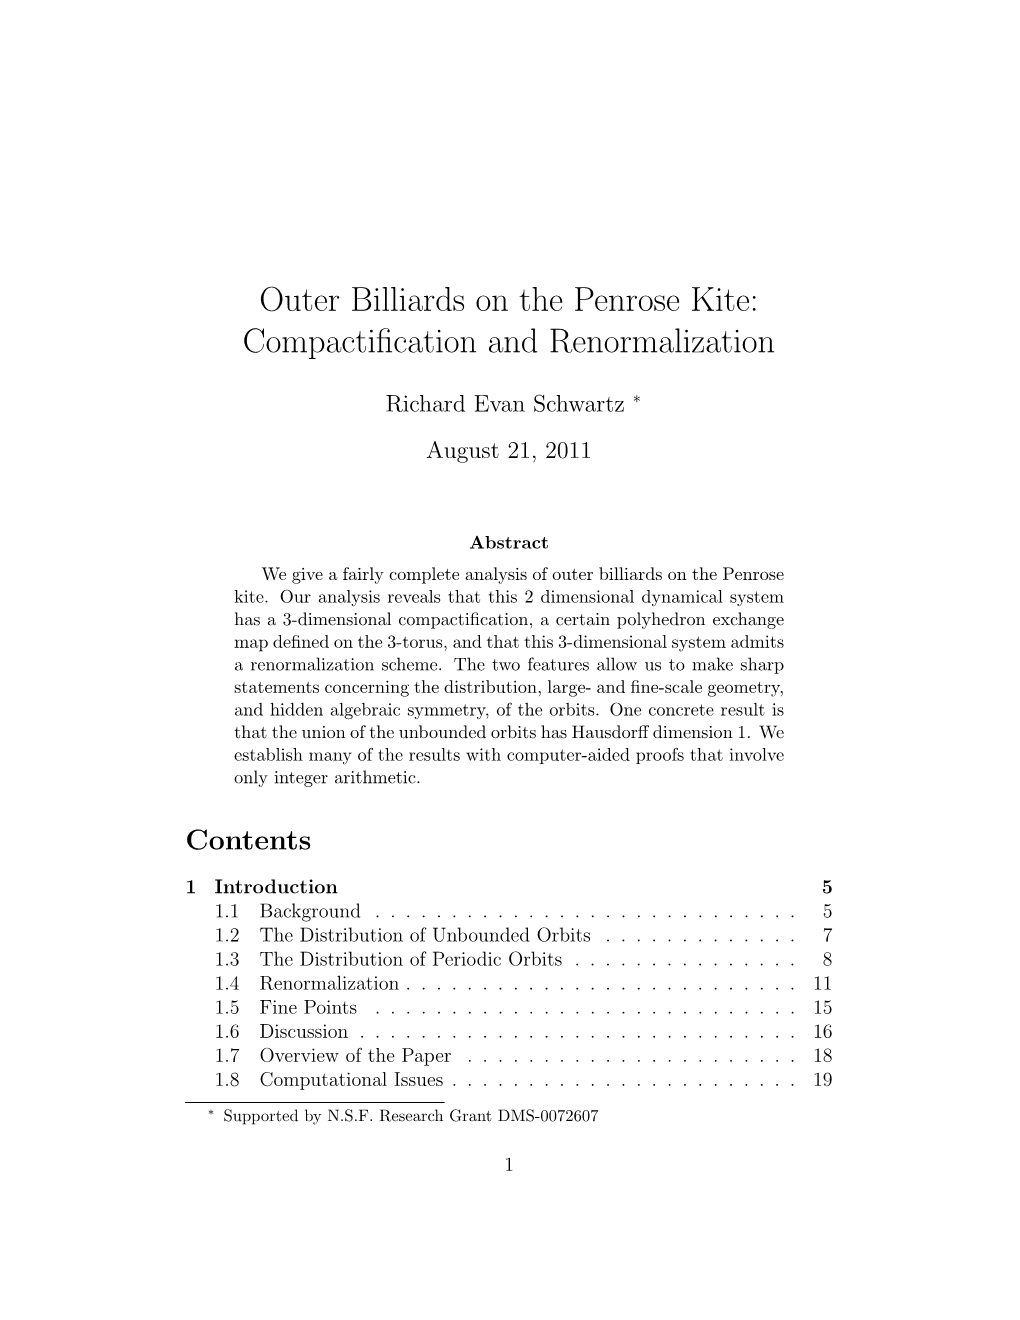 Outer Billiards on the Penrose Kite: Compactification And